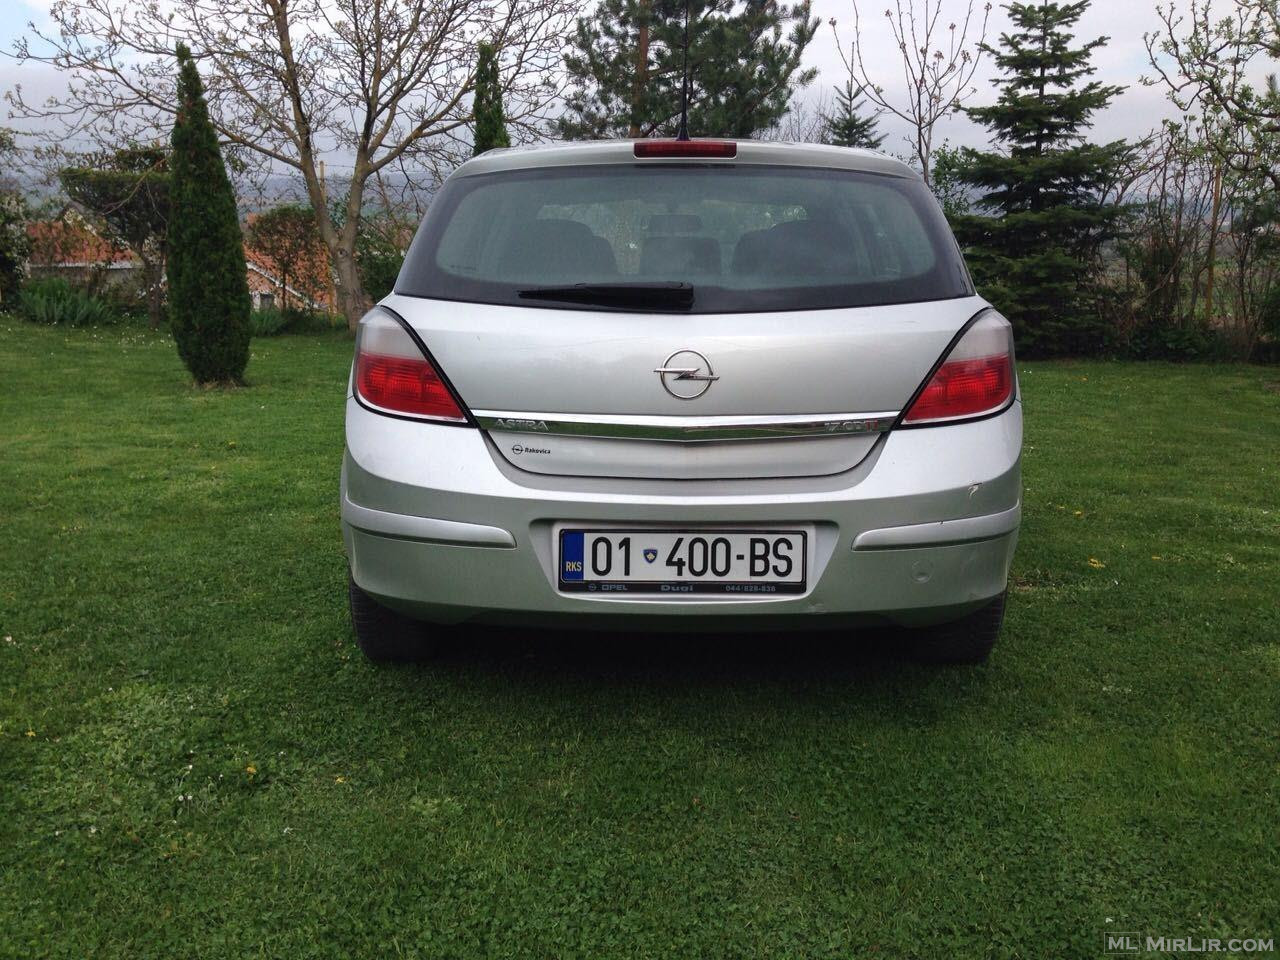 Shes Opel Astra 1.7 cdti 2004 